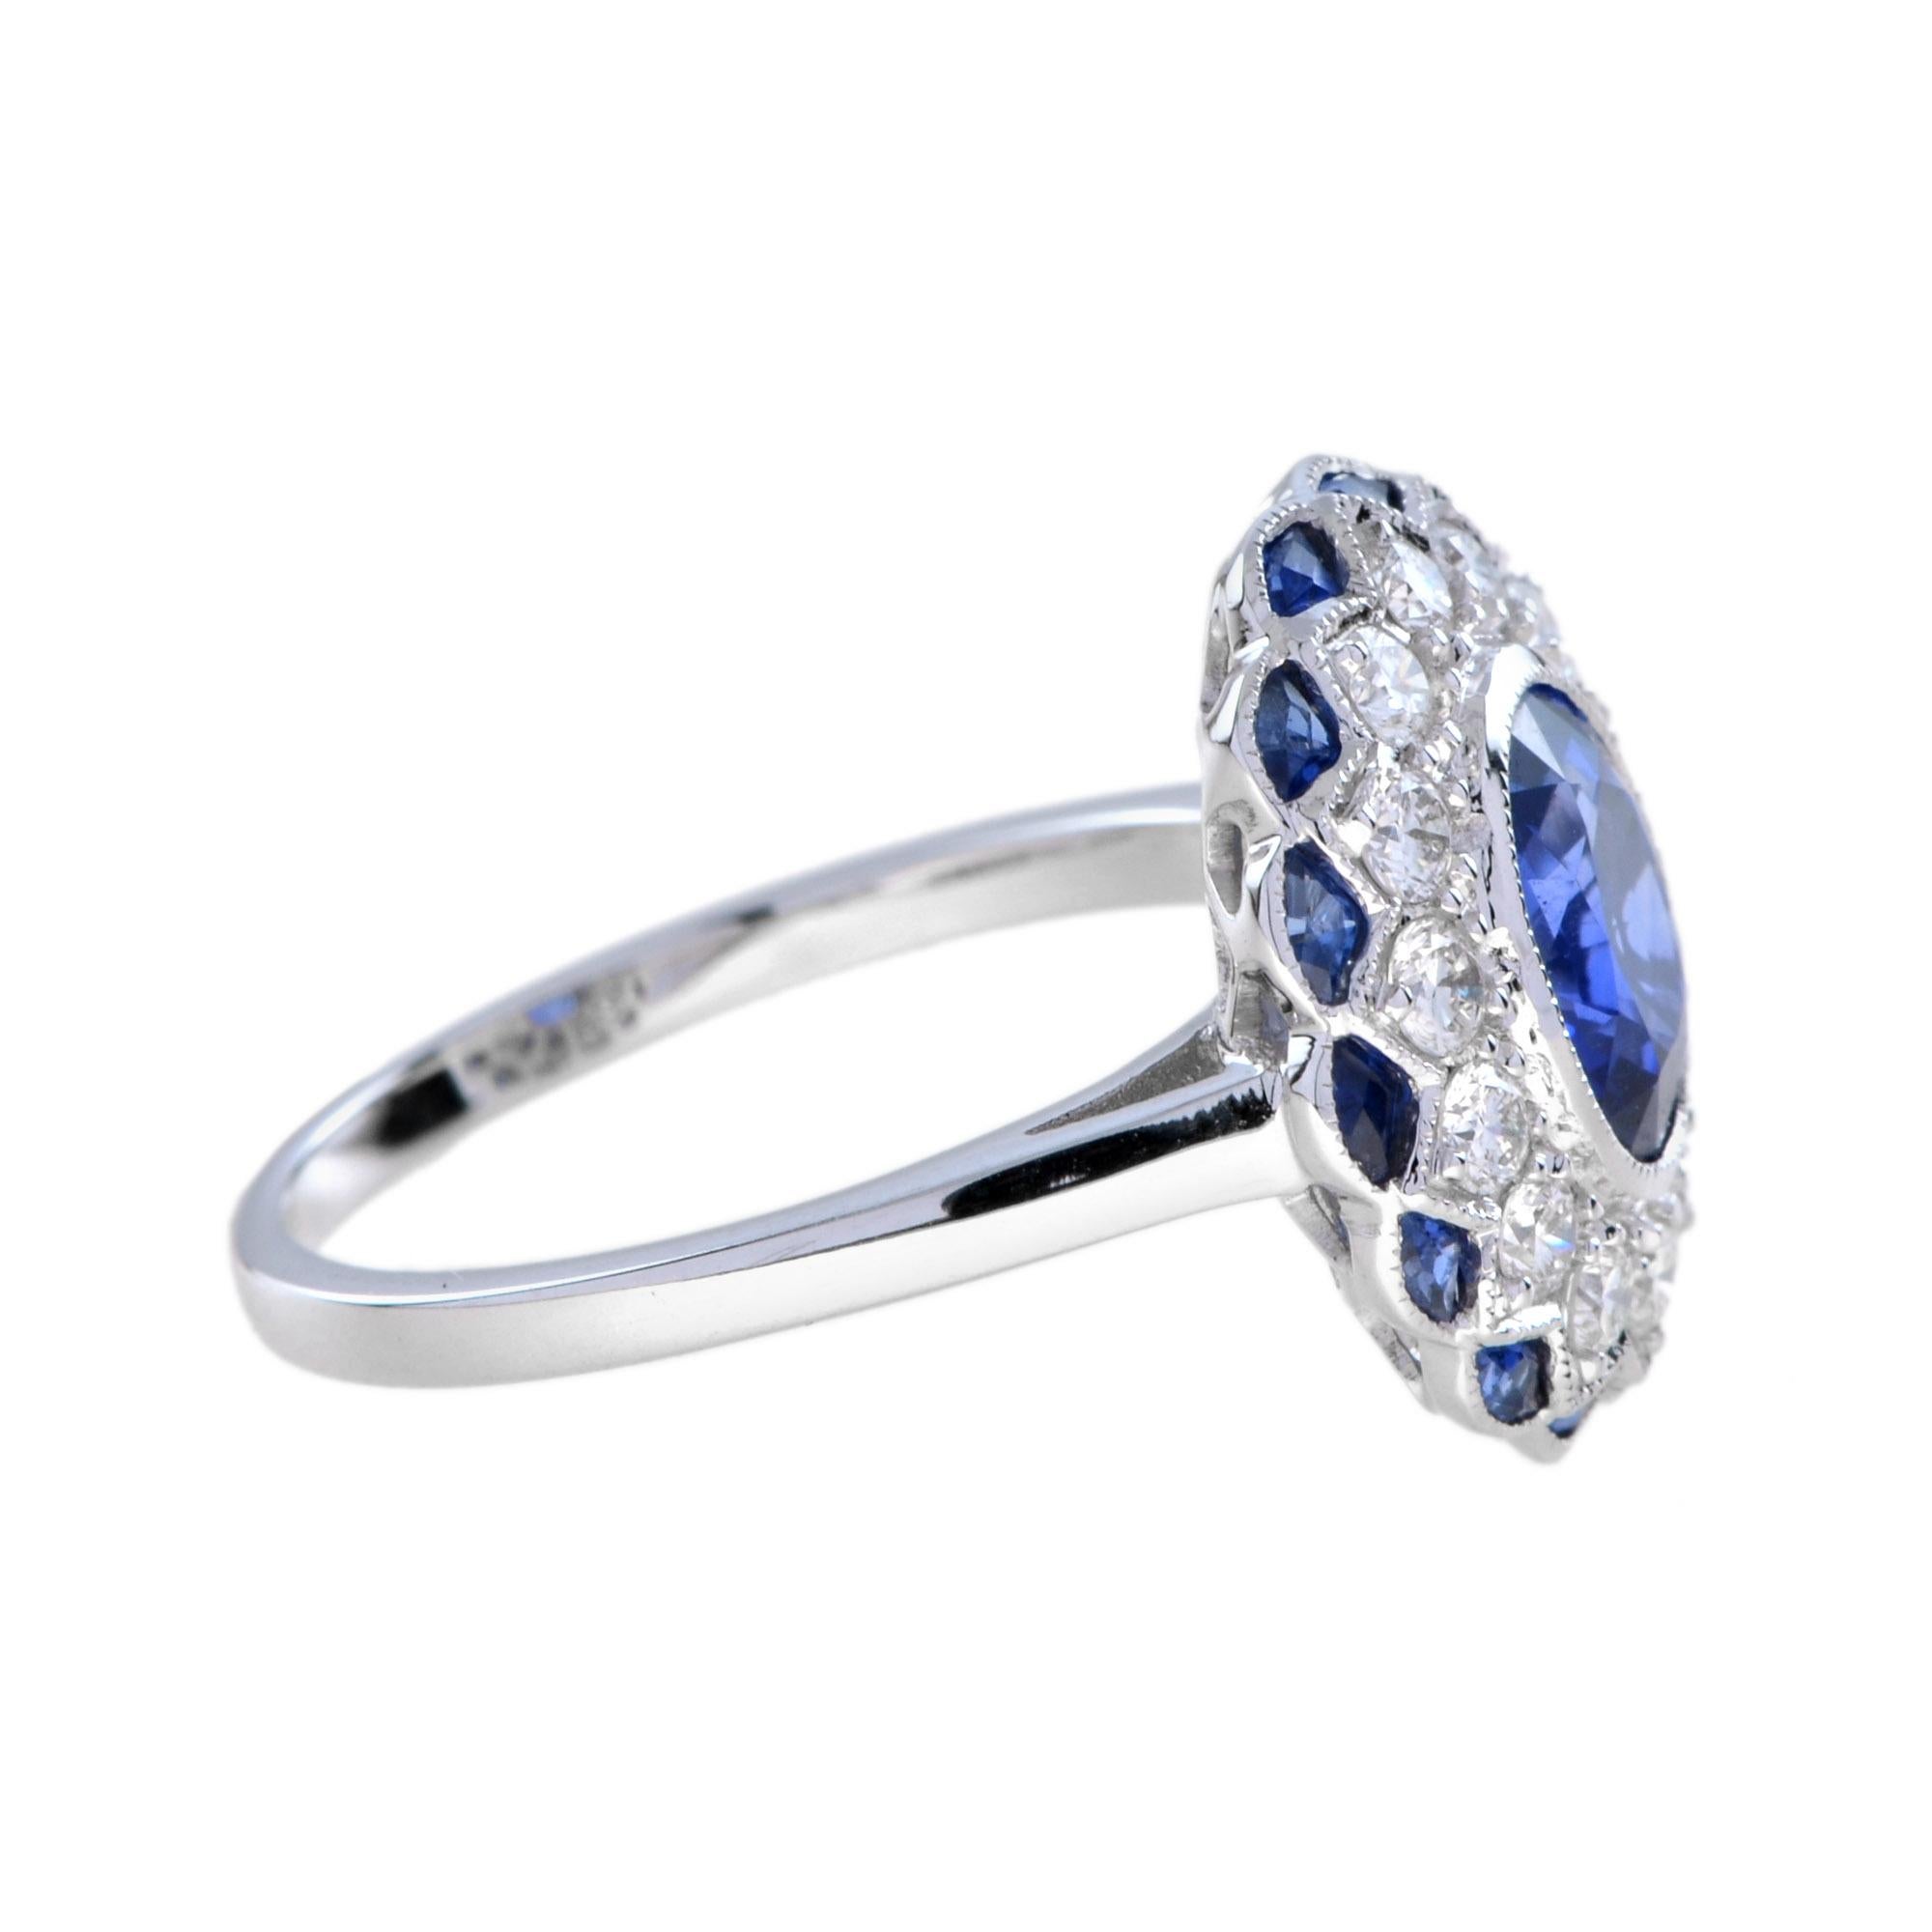 Women's Oval Cut Ceylon Sapphire and Diamond Art Deco Style Halo Ring in 18K White Gold For Sale